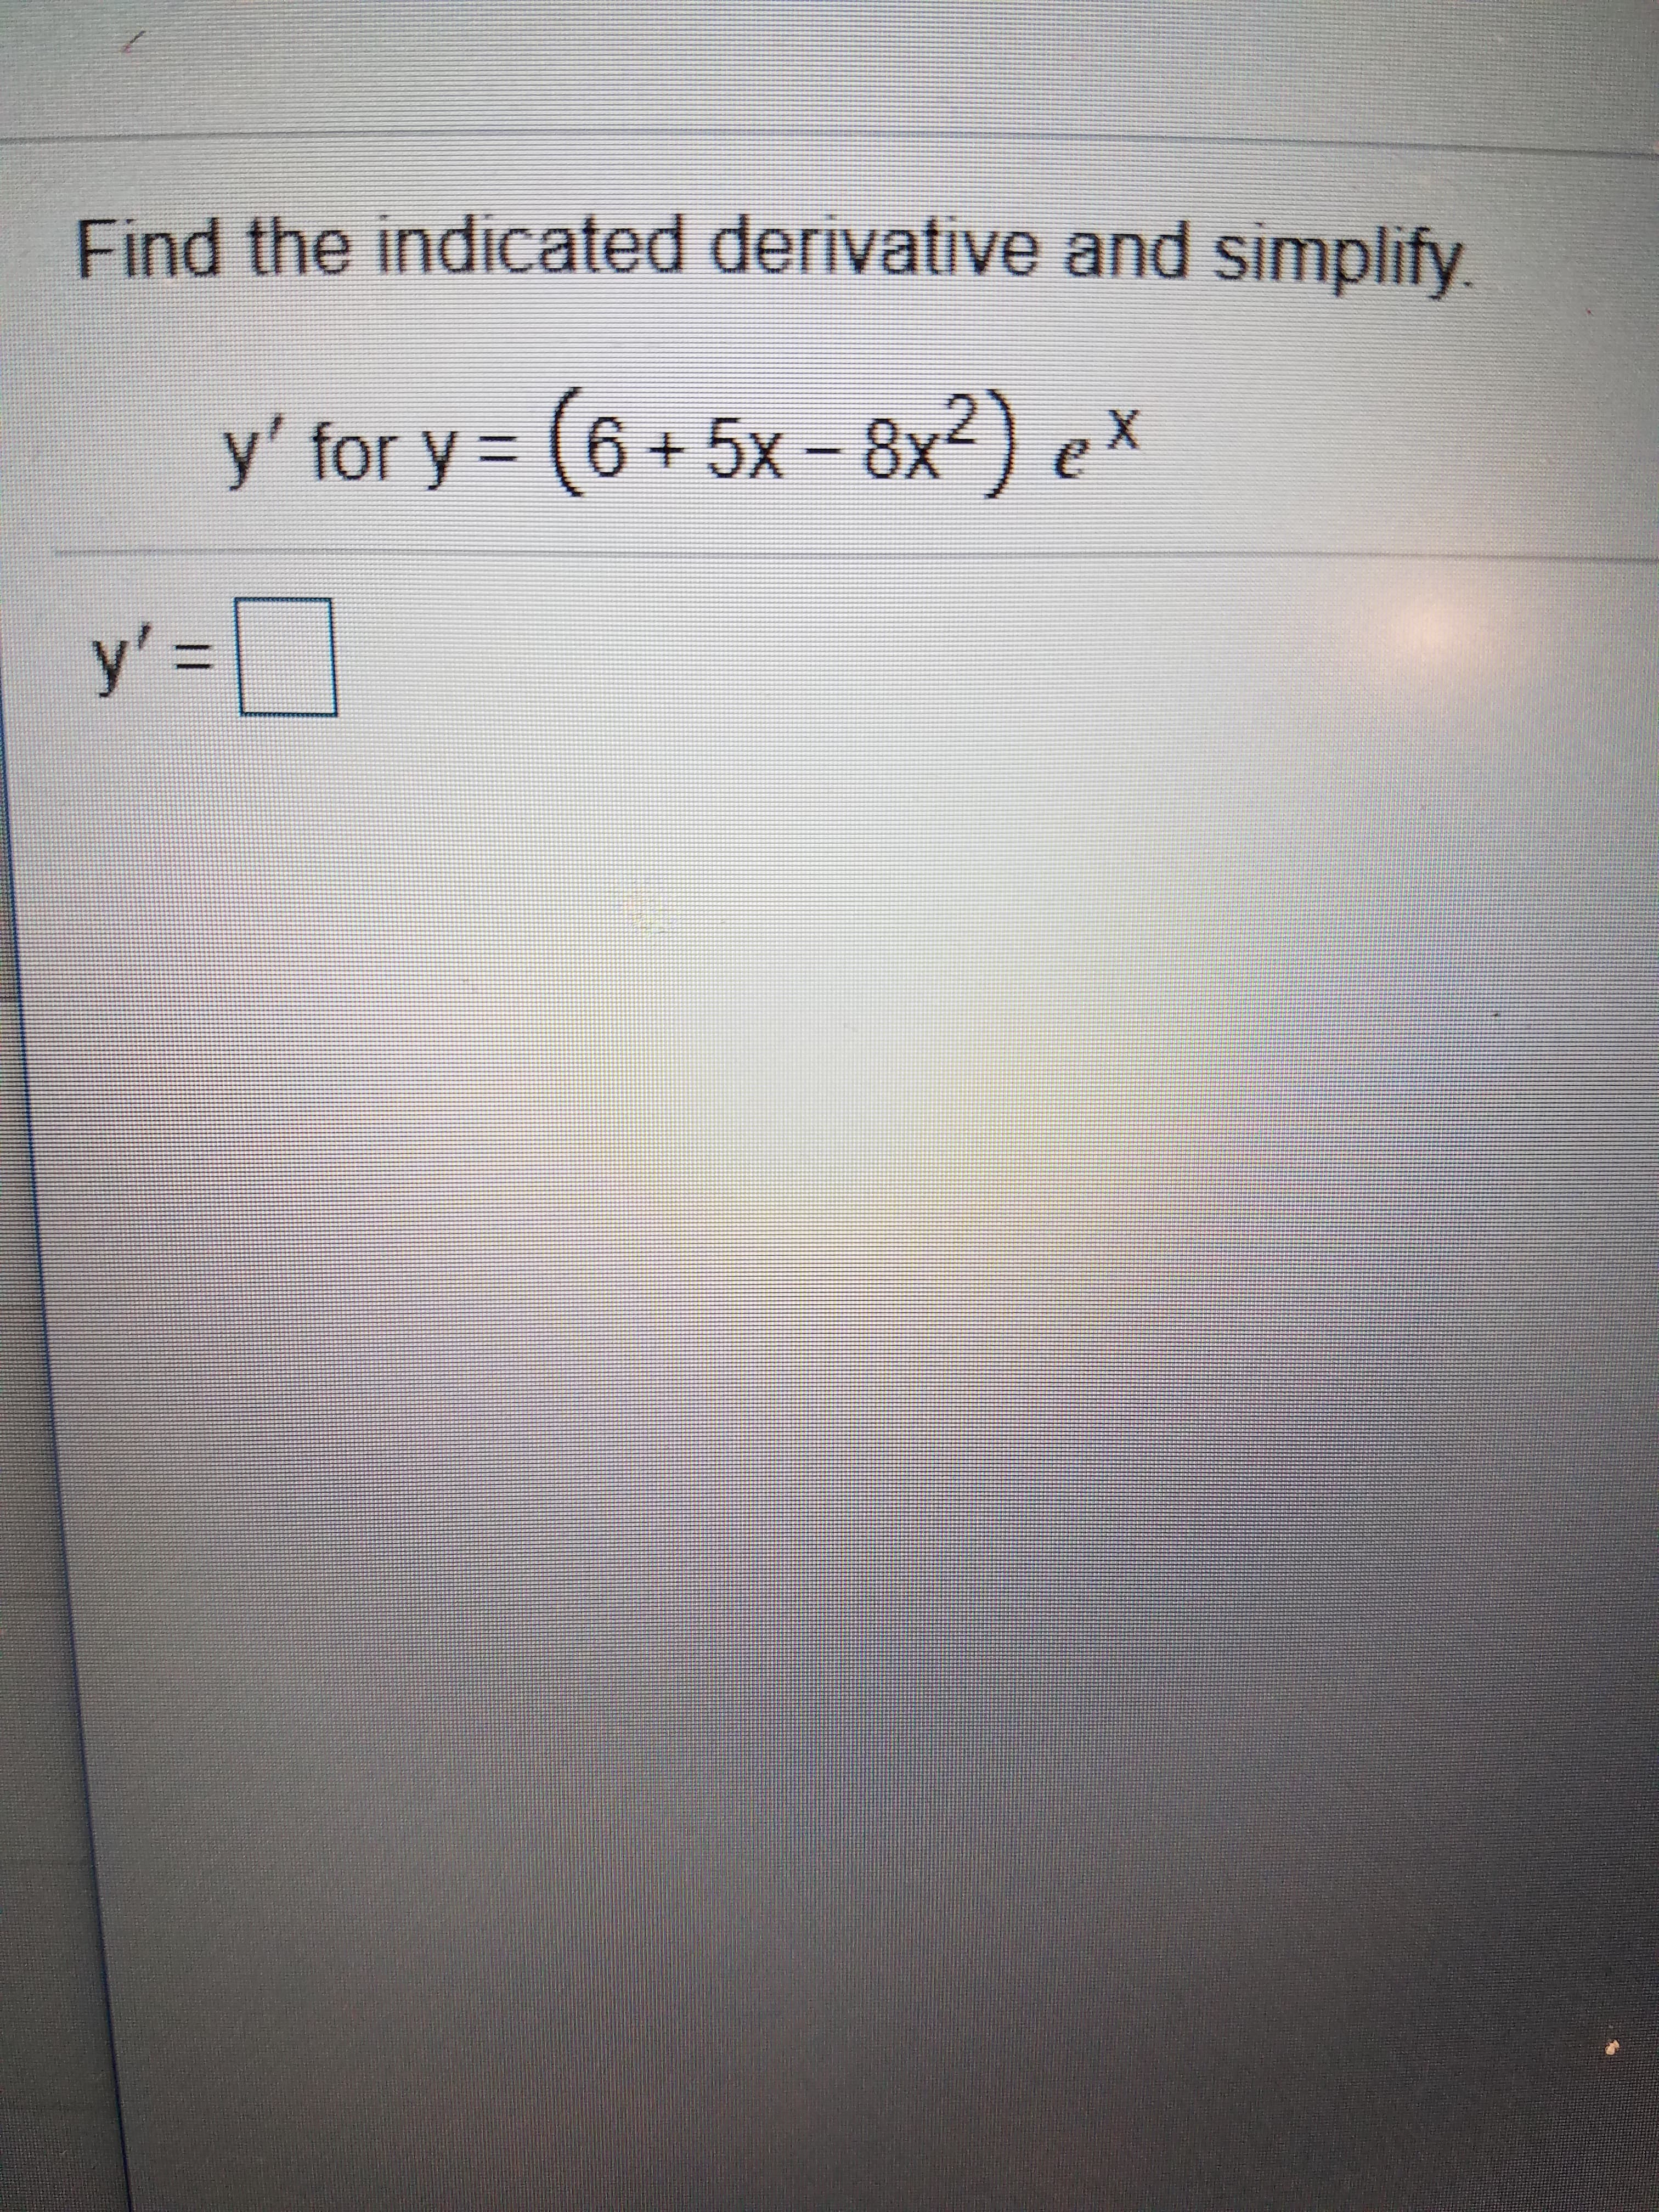 Find the indicated derivative and simplify
y' for y (6+5x-8x2) ex
y'-
II
